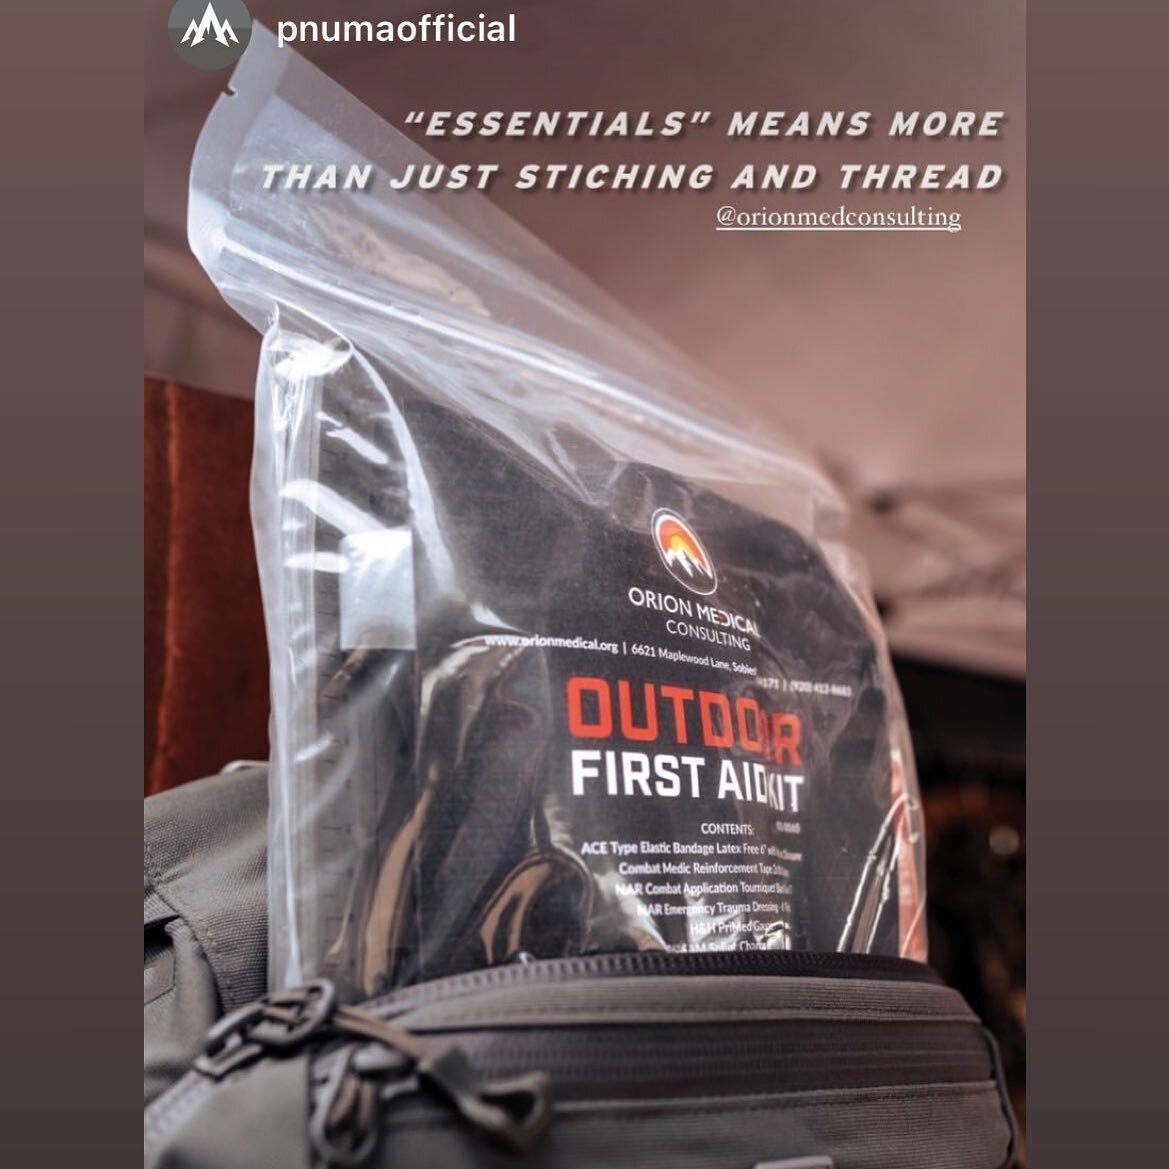 Before your next adventure outfit yourself with the highest quality @pnumaofficial gear and a top notch first aid kit!!